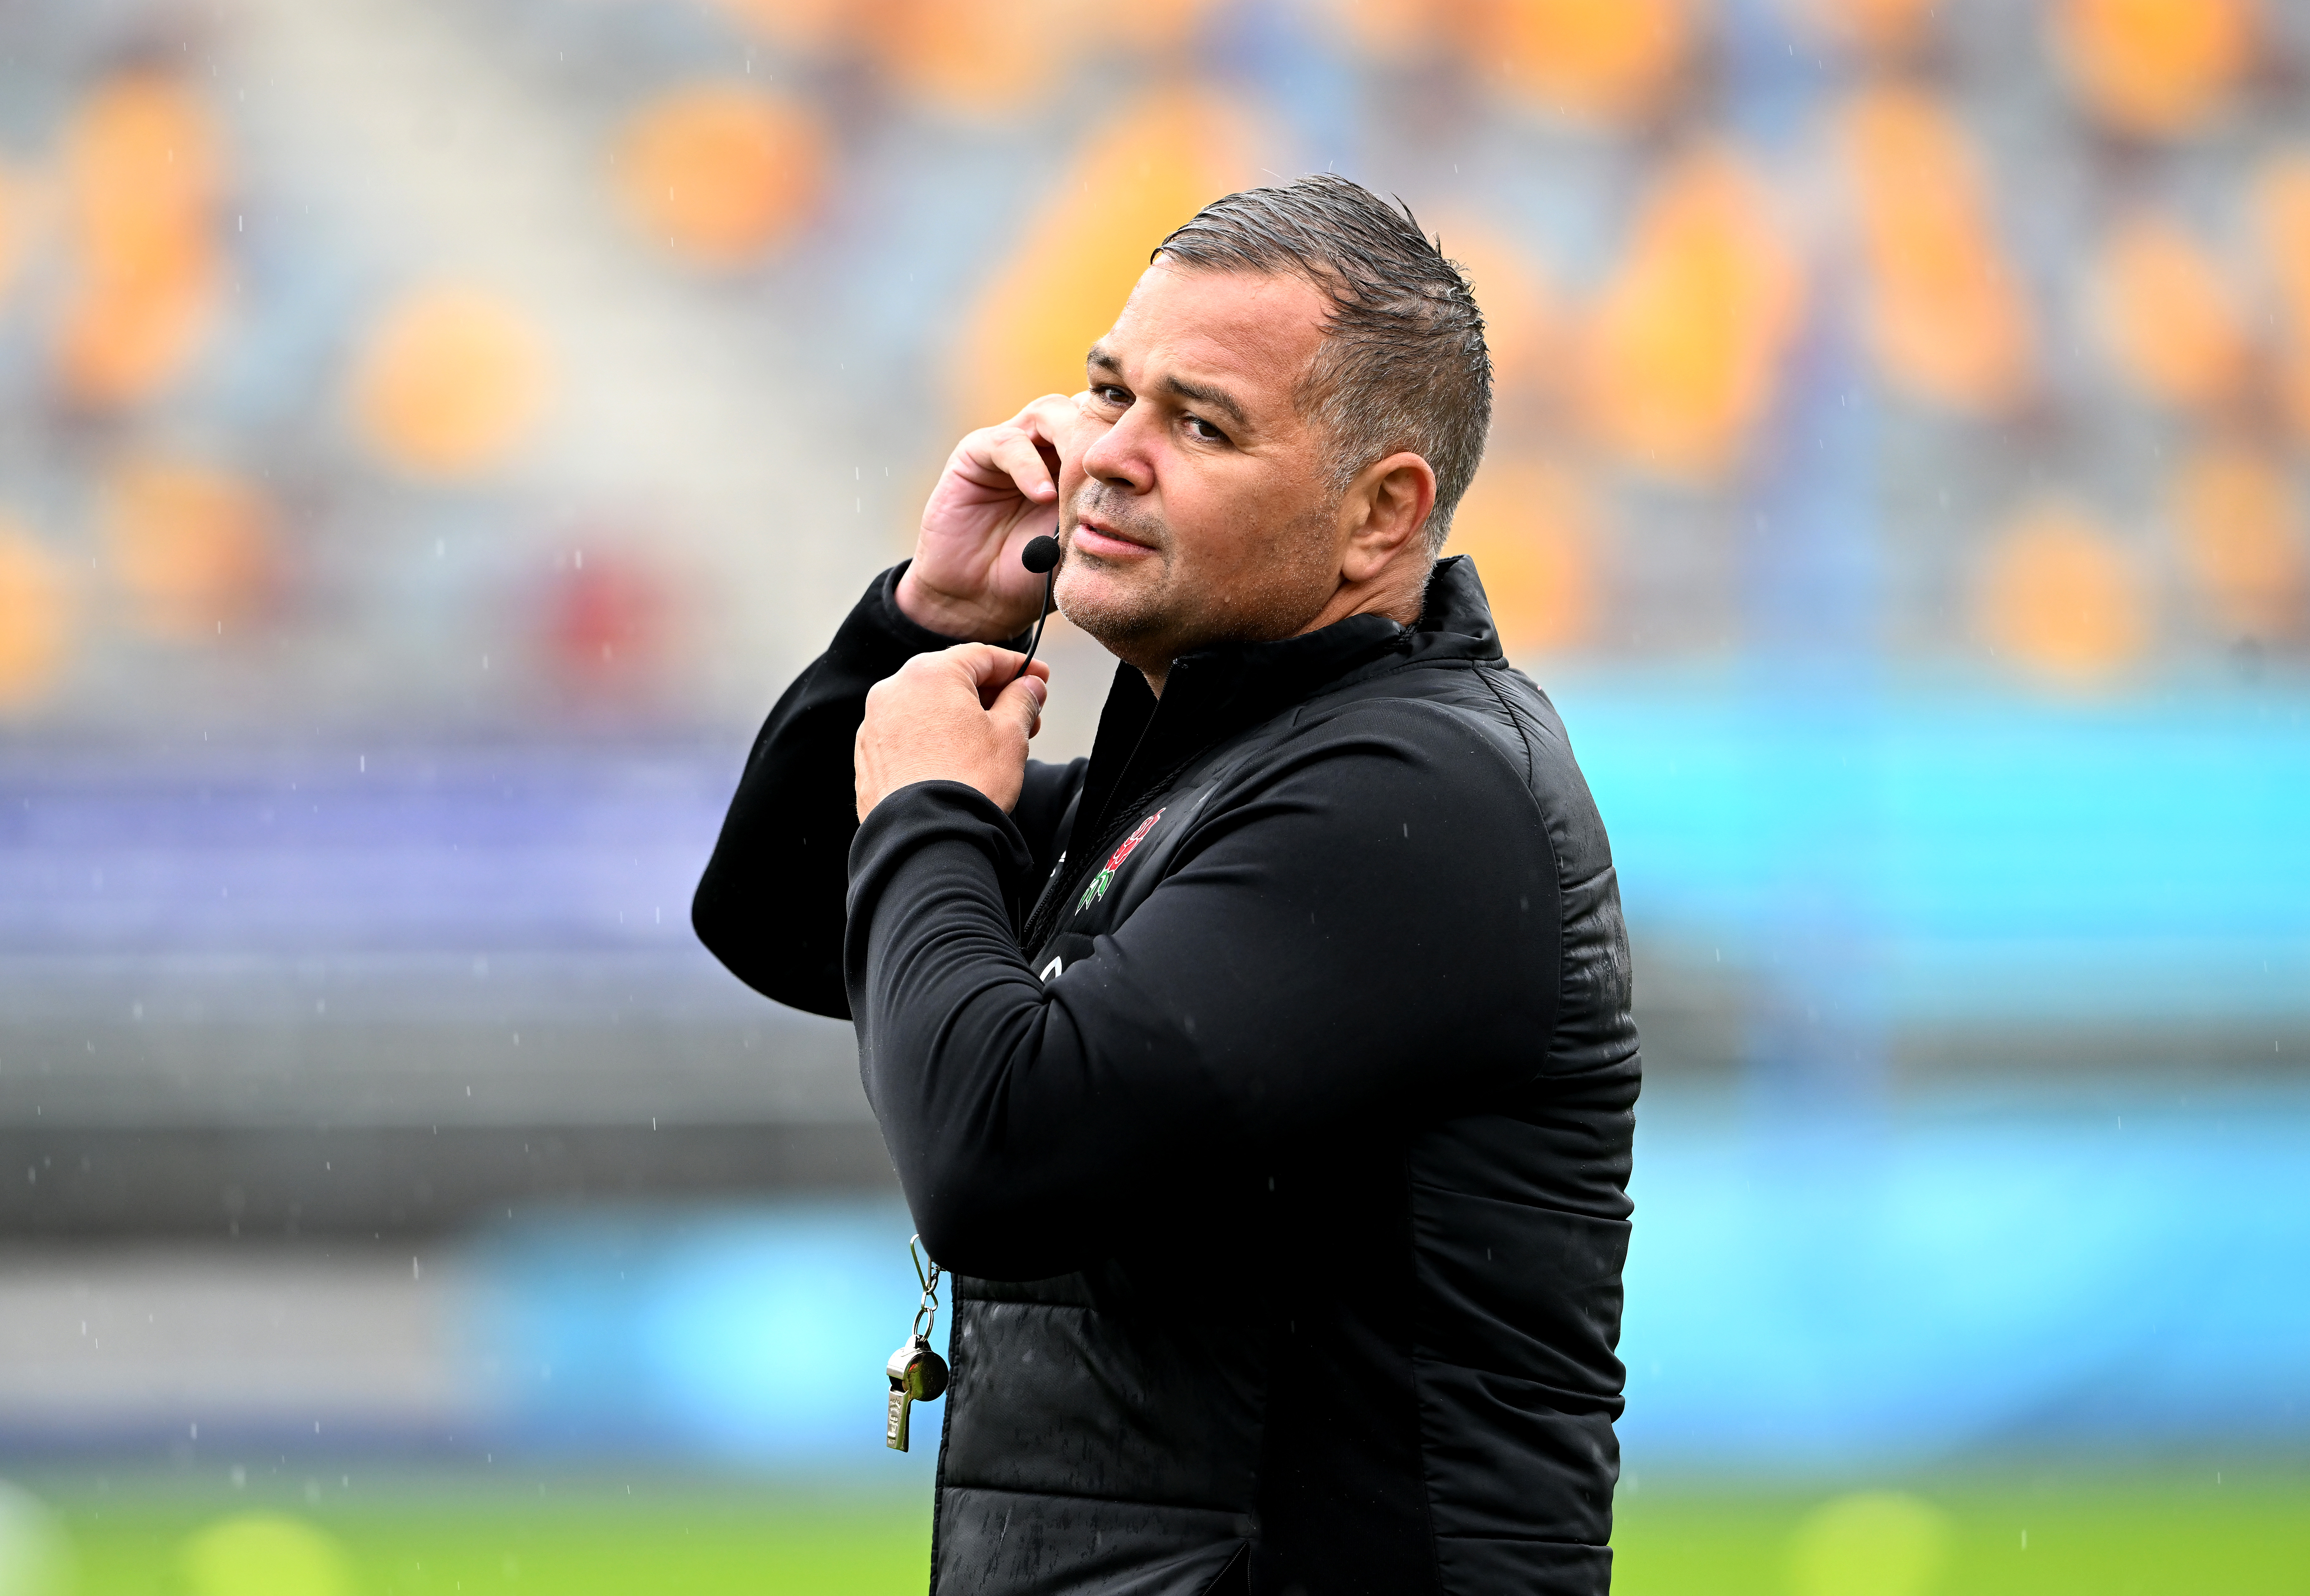 Manly Sea Eagles announce Anthony Seibold as new head coach, confirm assistants